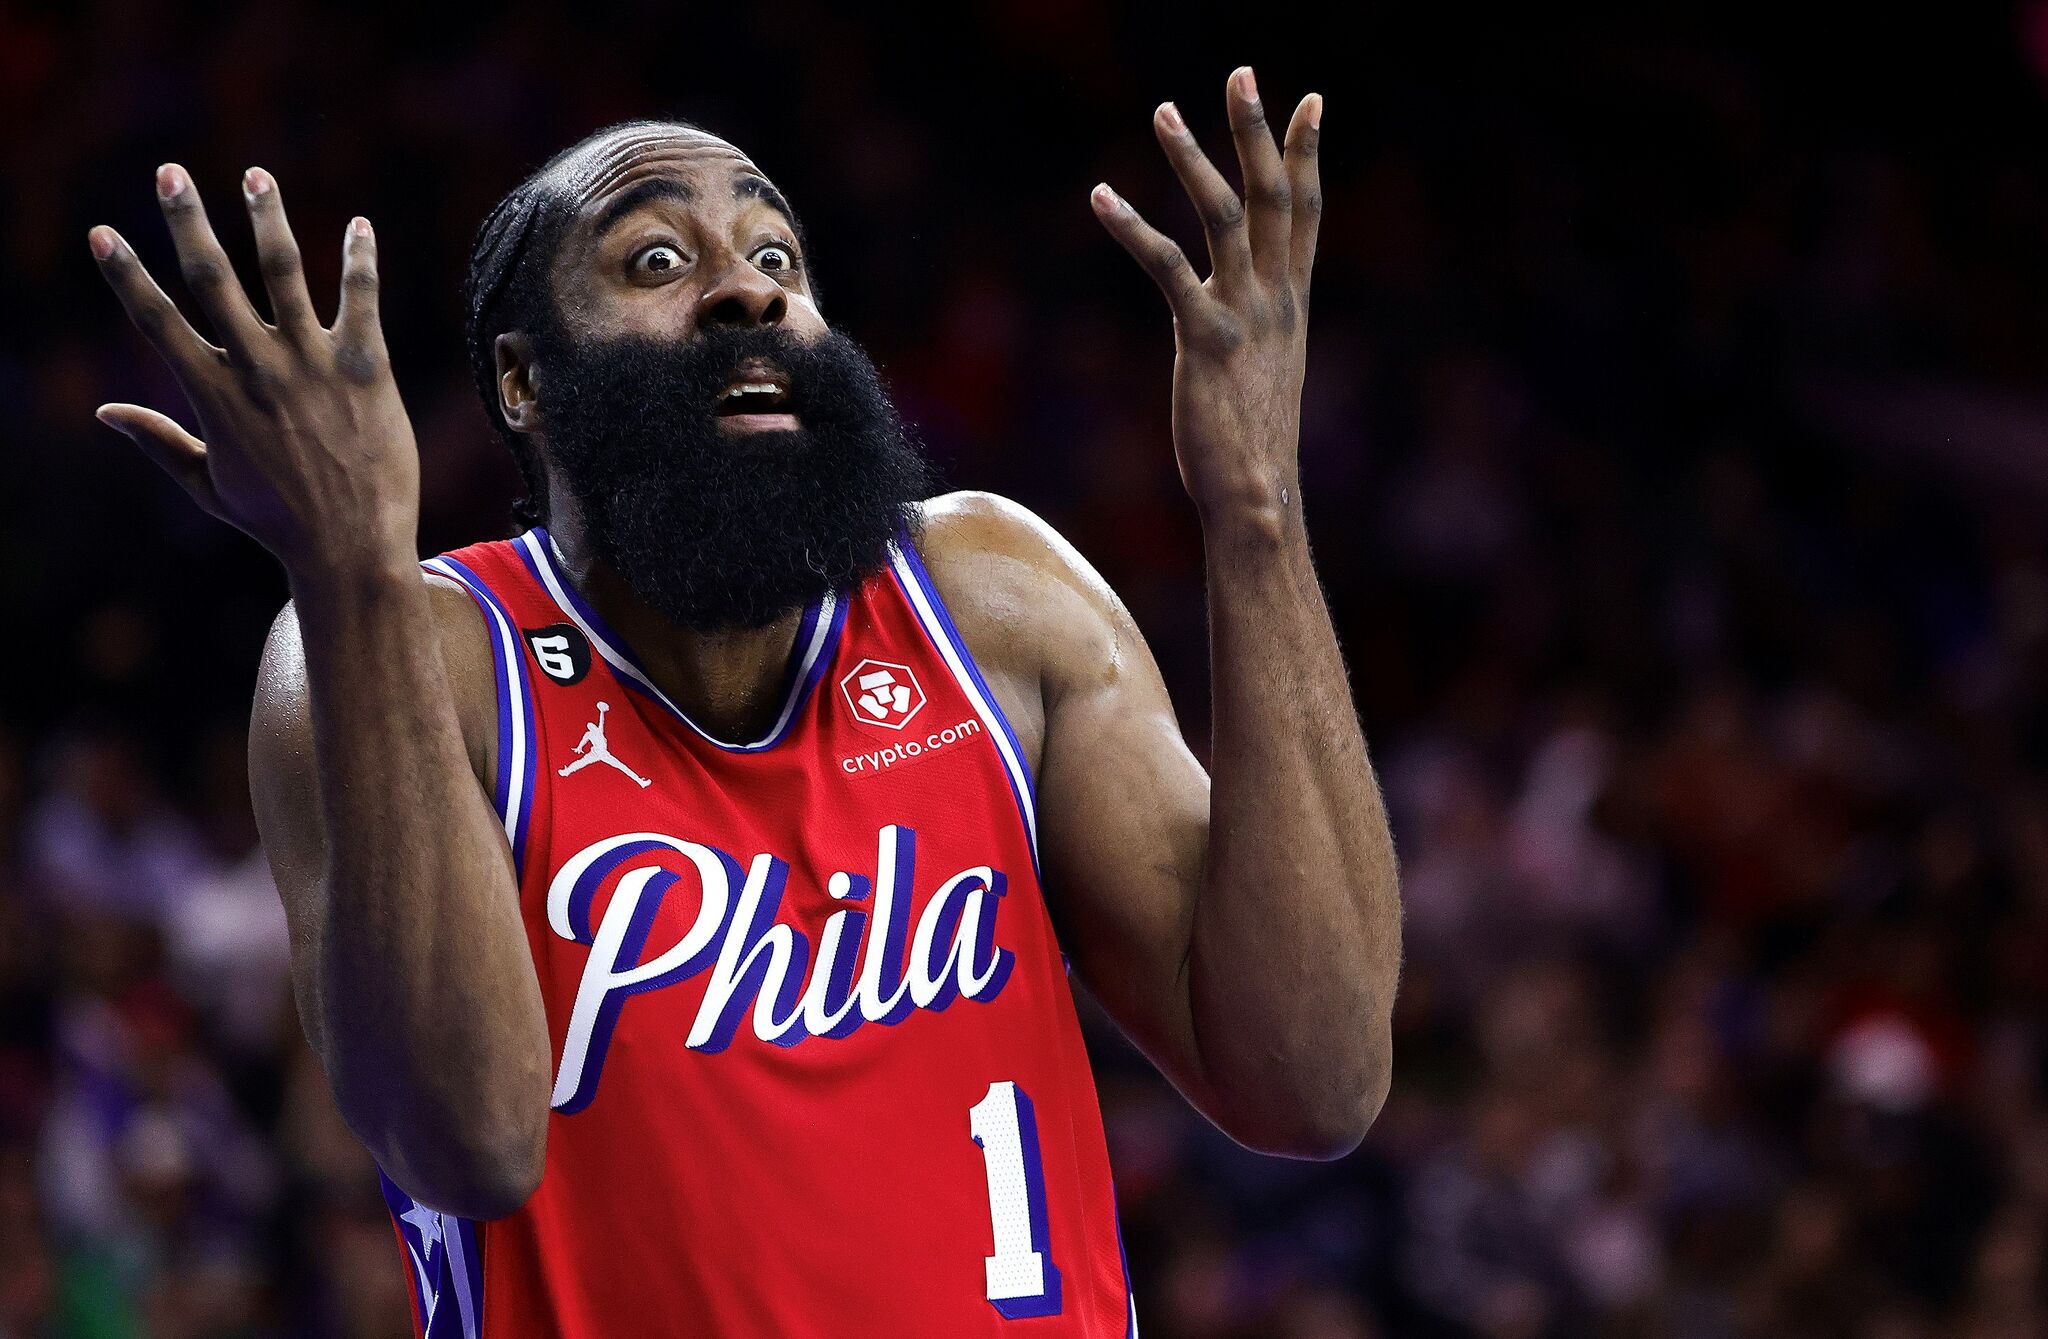 Why James Harden Isn't Wearing No. 13 With the 76ers